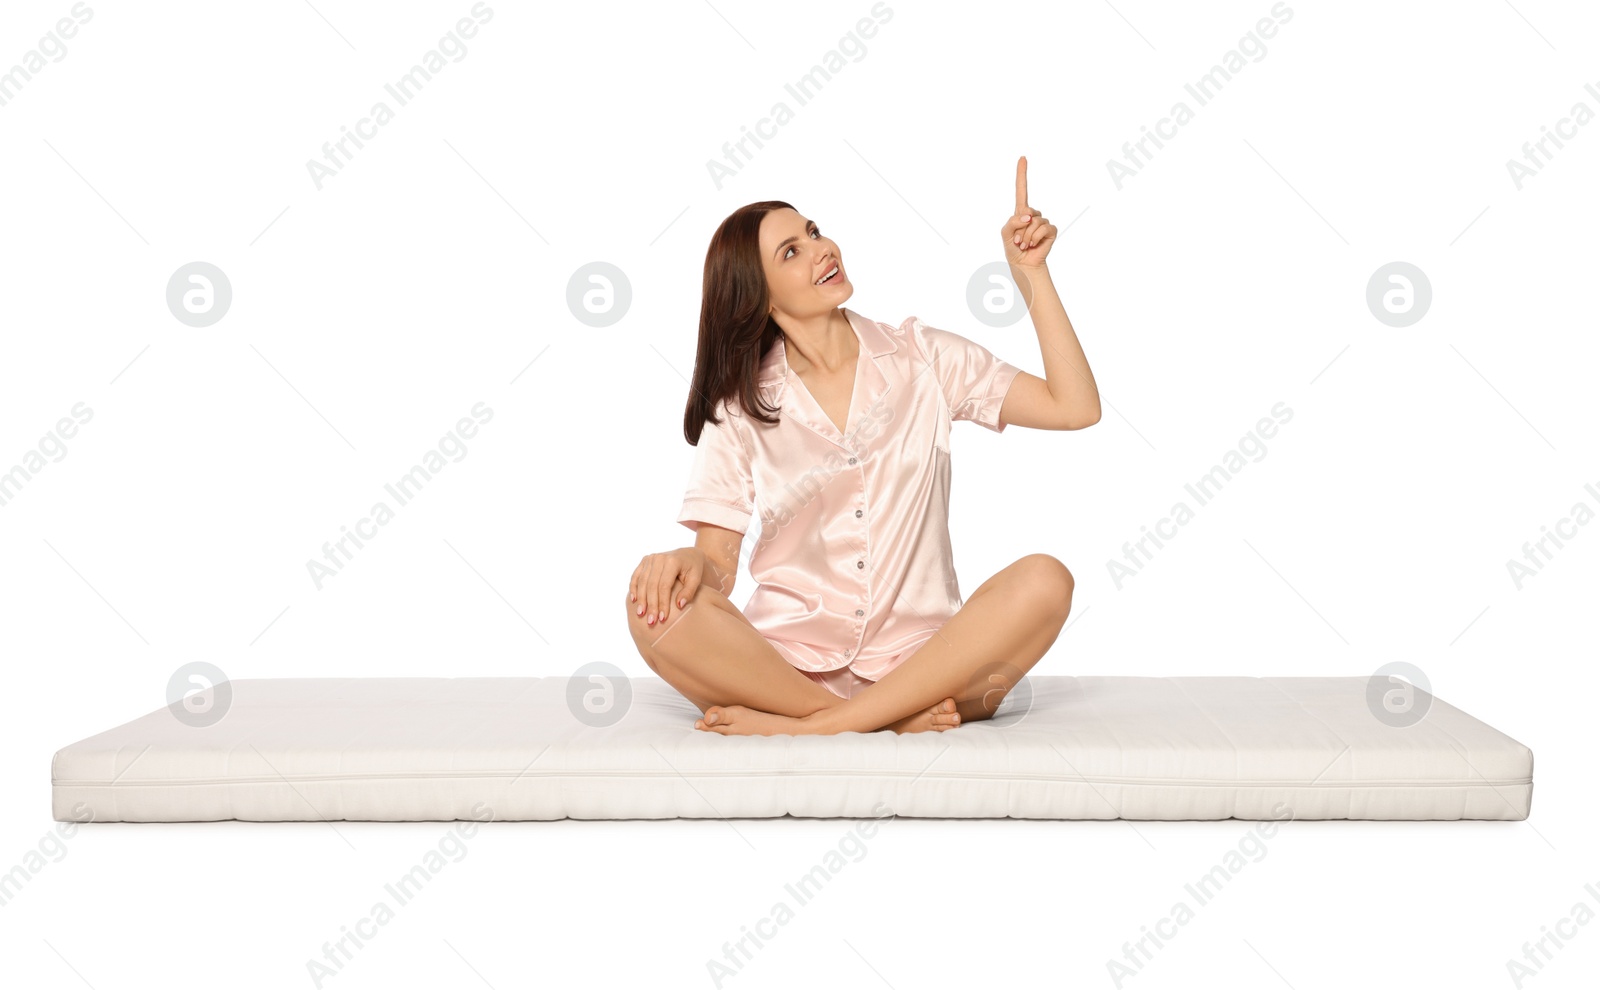 Photo of Young woman sitting on soft mattress and pointing upwards against white background